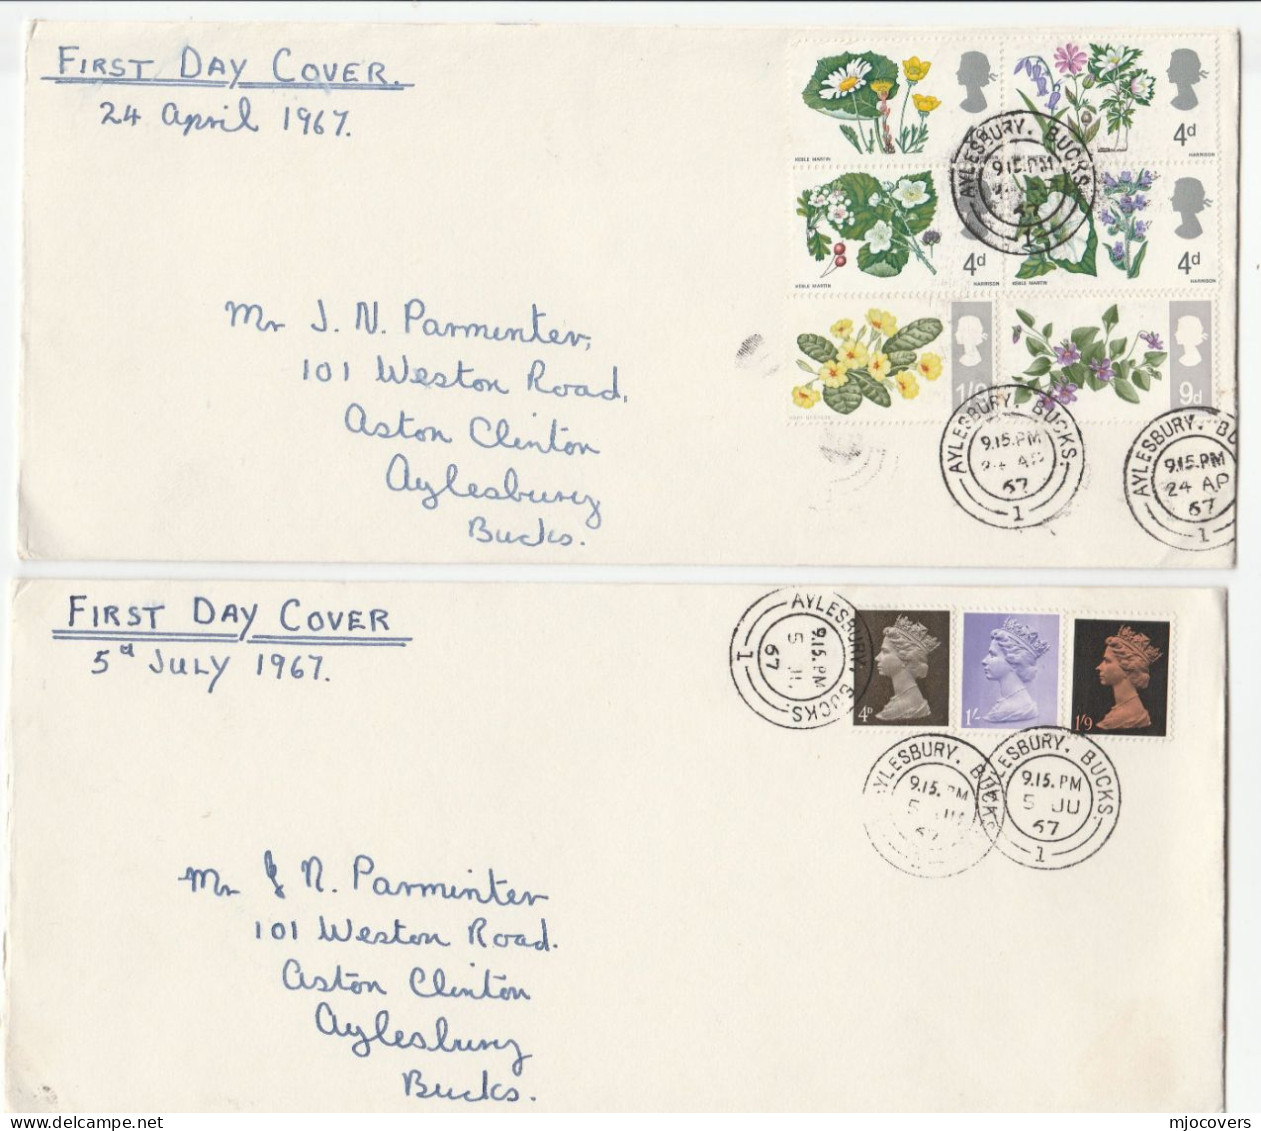 2  1967 FDC  AYLESBURY CDS Flowers & Definitives  Fdc GB Stamps Cover - 1952-1971 Pre-Decimal Issues